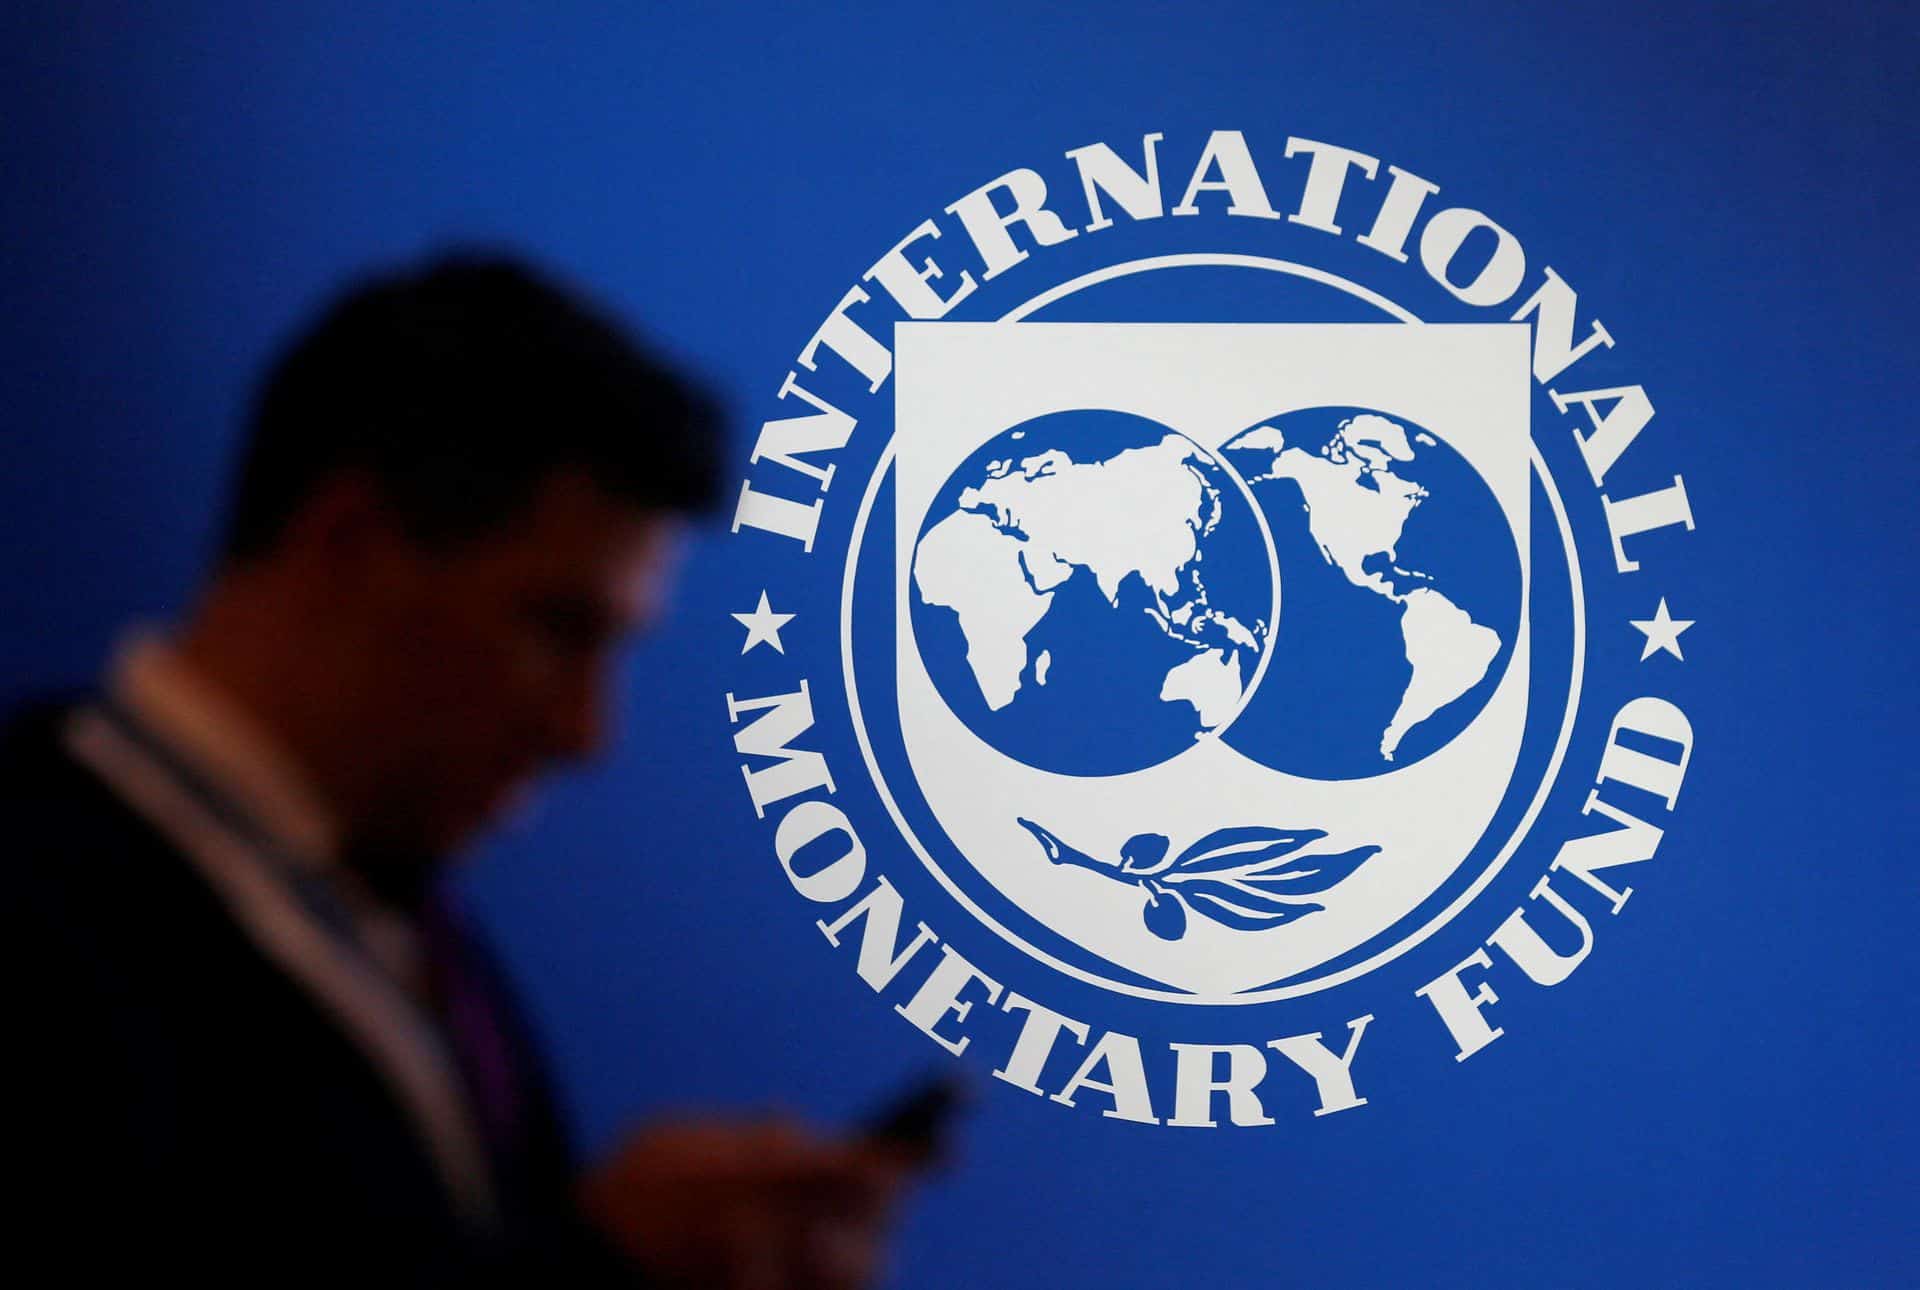 IMF says sub-Saharan Africa financing conditions tough, outflows continue